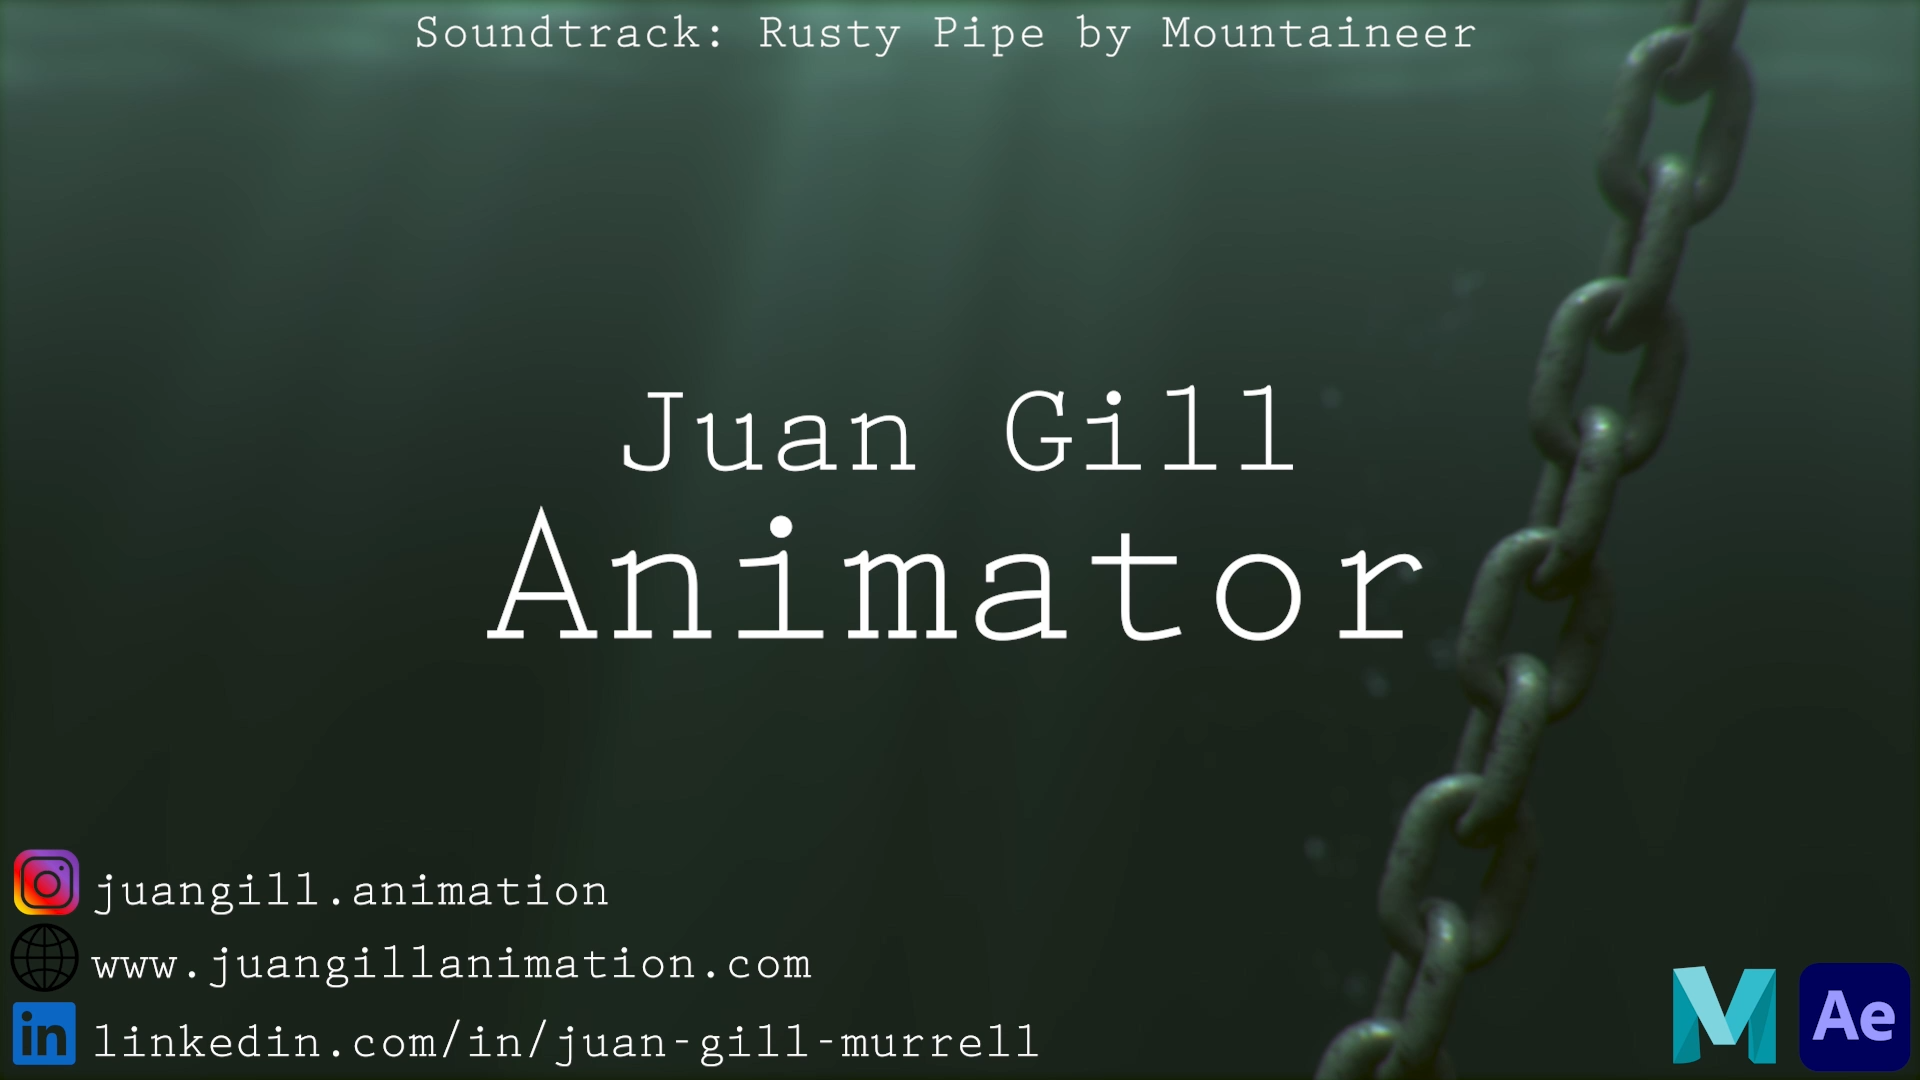 BA Animation work by Juan Murrell showing a compilation of animated pieces, ranging from 3D character animation in Maya to motion graphics using AfterEffects.